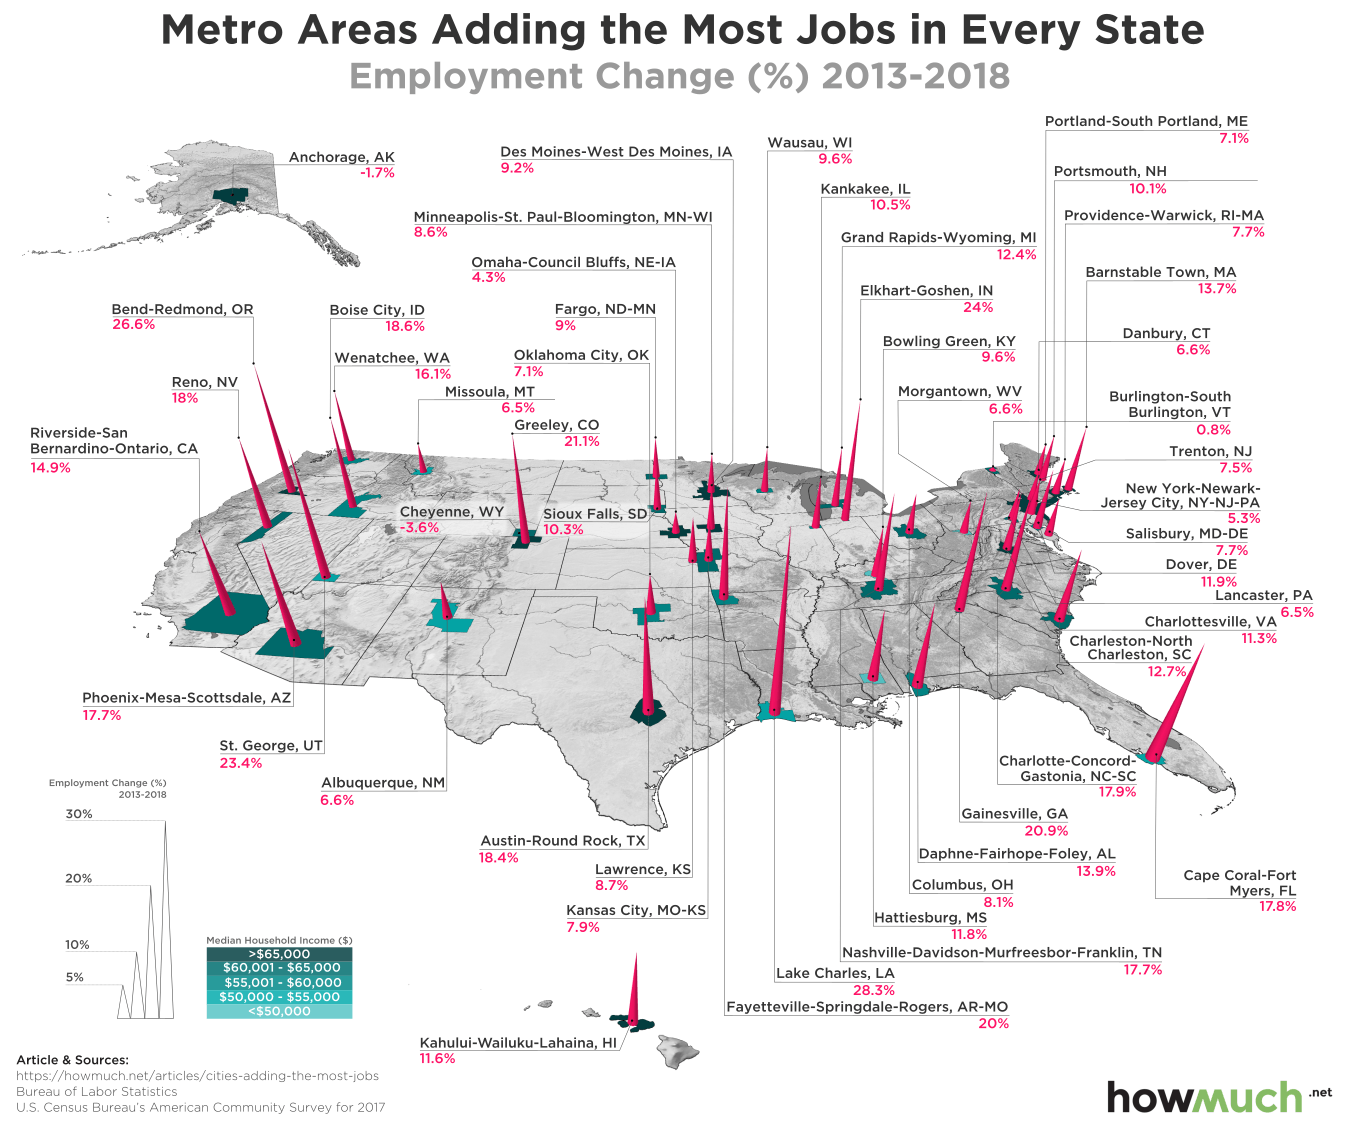 These Cities Have The Highest Job Growth in Each State